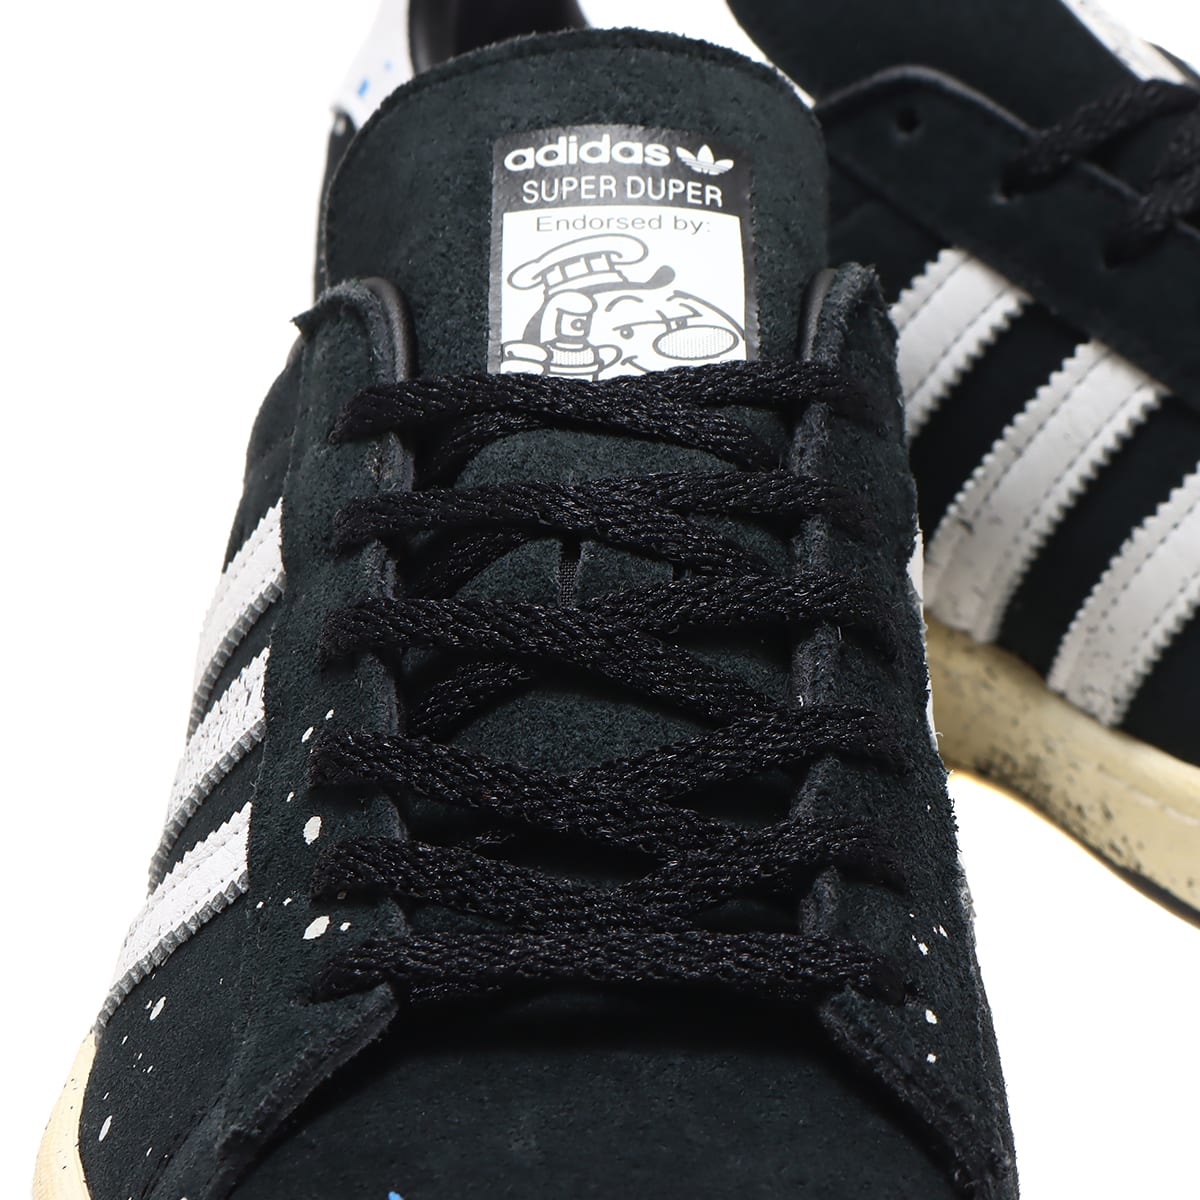 adidas CAMPUS 80s COOK CORE BLACK/FOOTWEAR WHITE/REAL BLUE 22SS-S